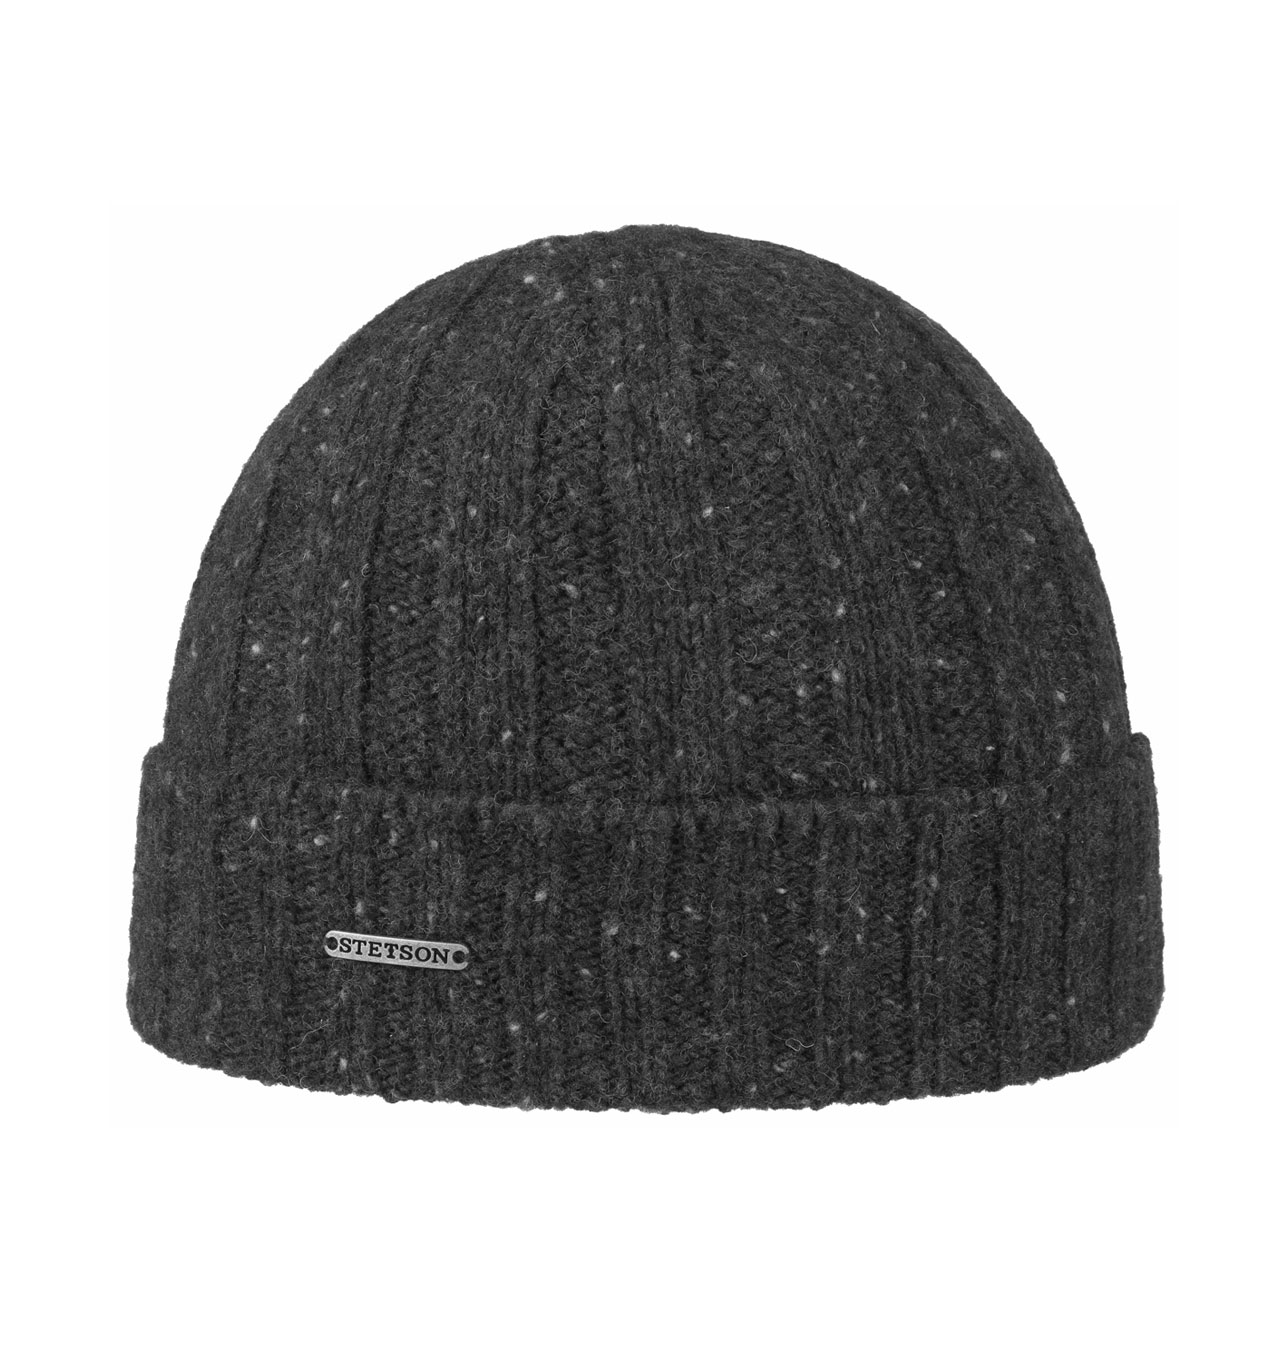 Stetson - Wisconsin Donegal Knit Beanie - Anthracite